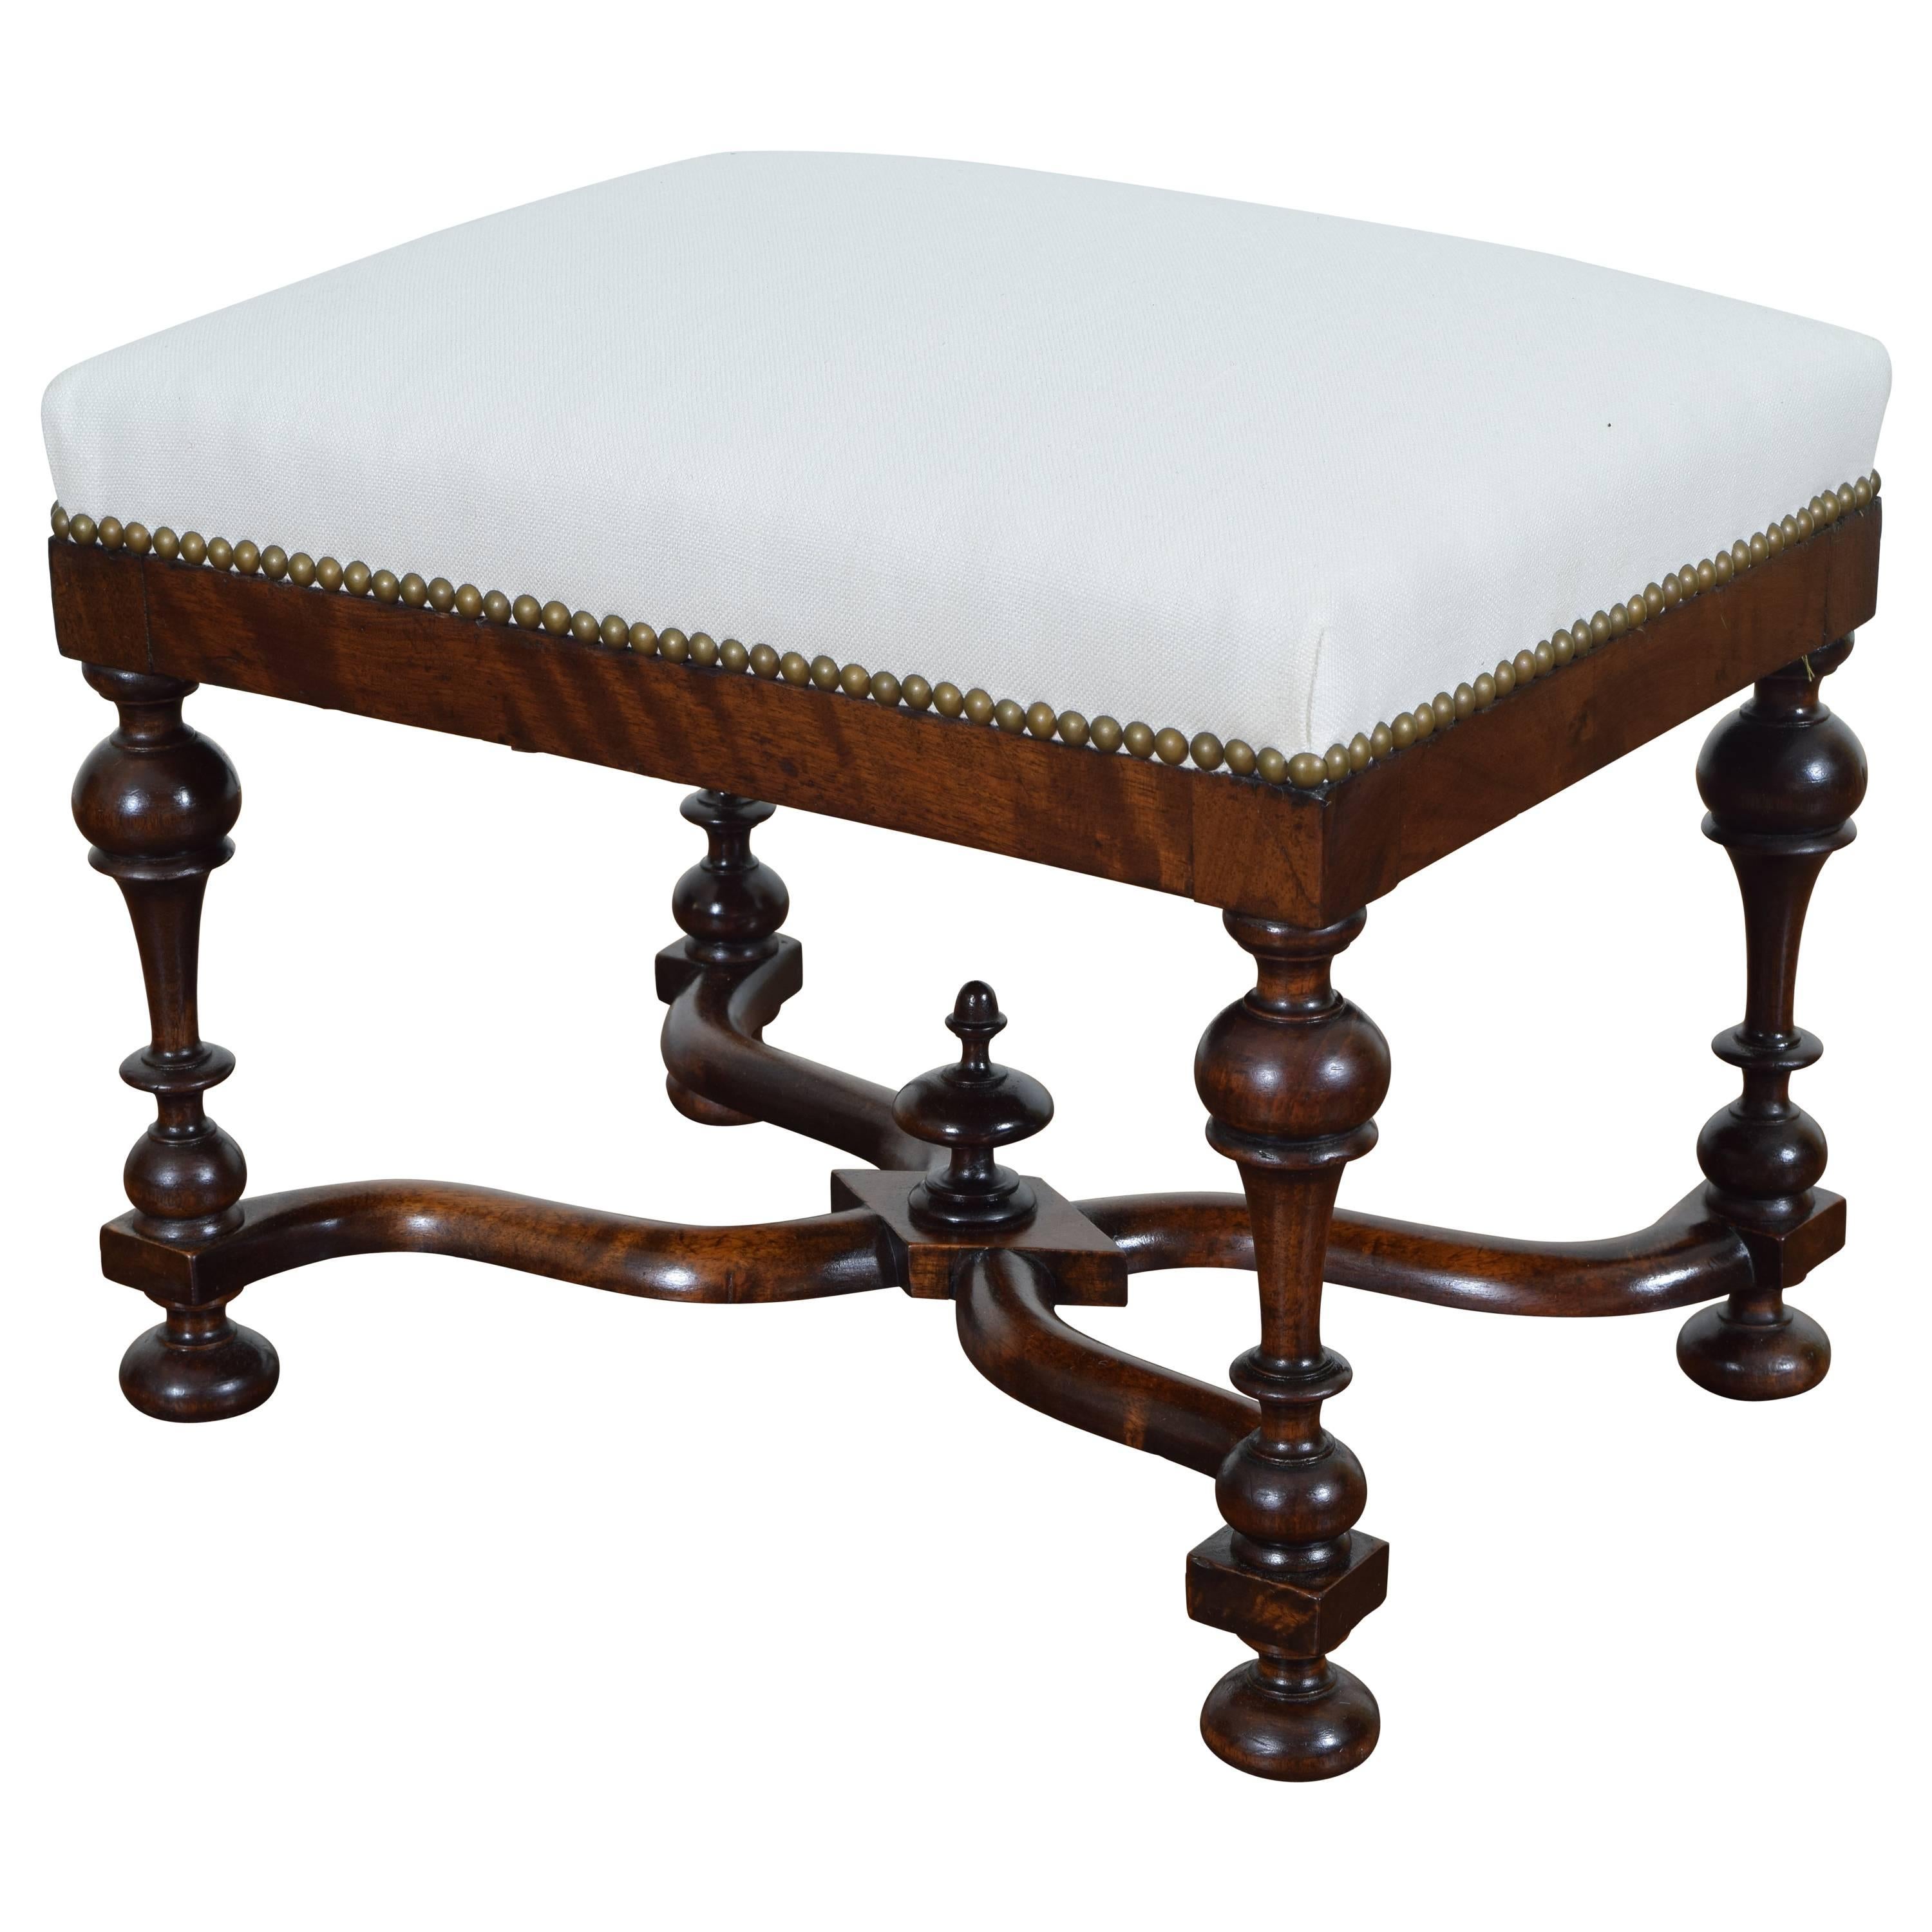 French Louis XIII Style Turned Walnut and Upholstered Bench